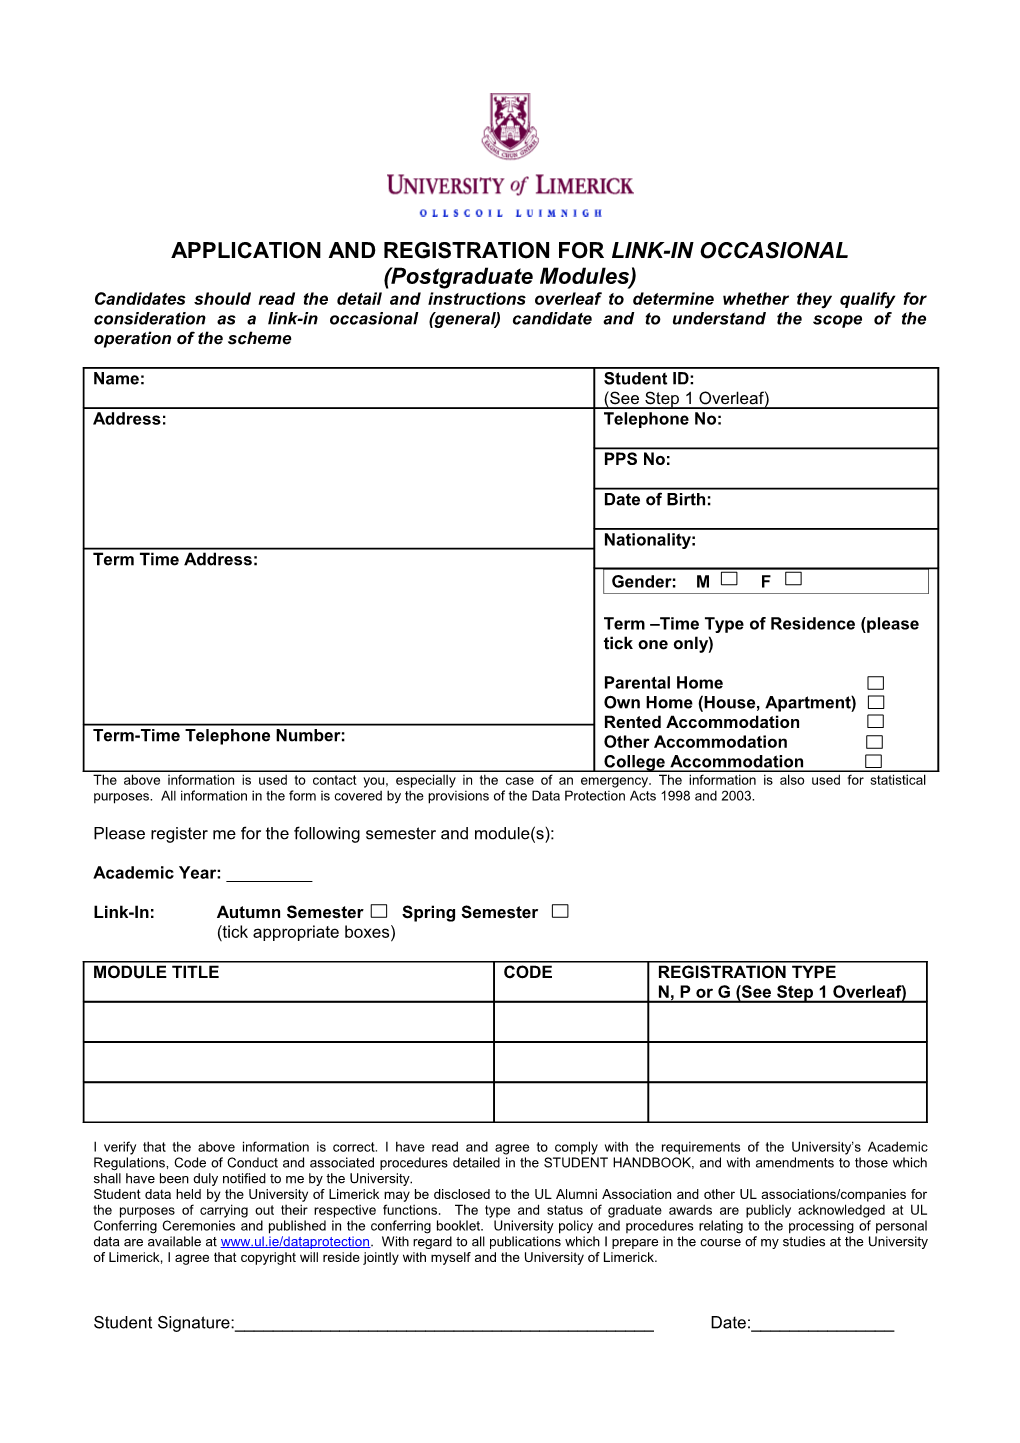 Link-In Application and Registration Form